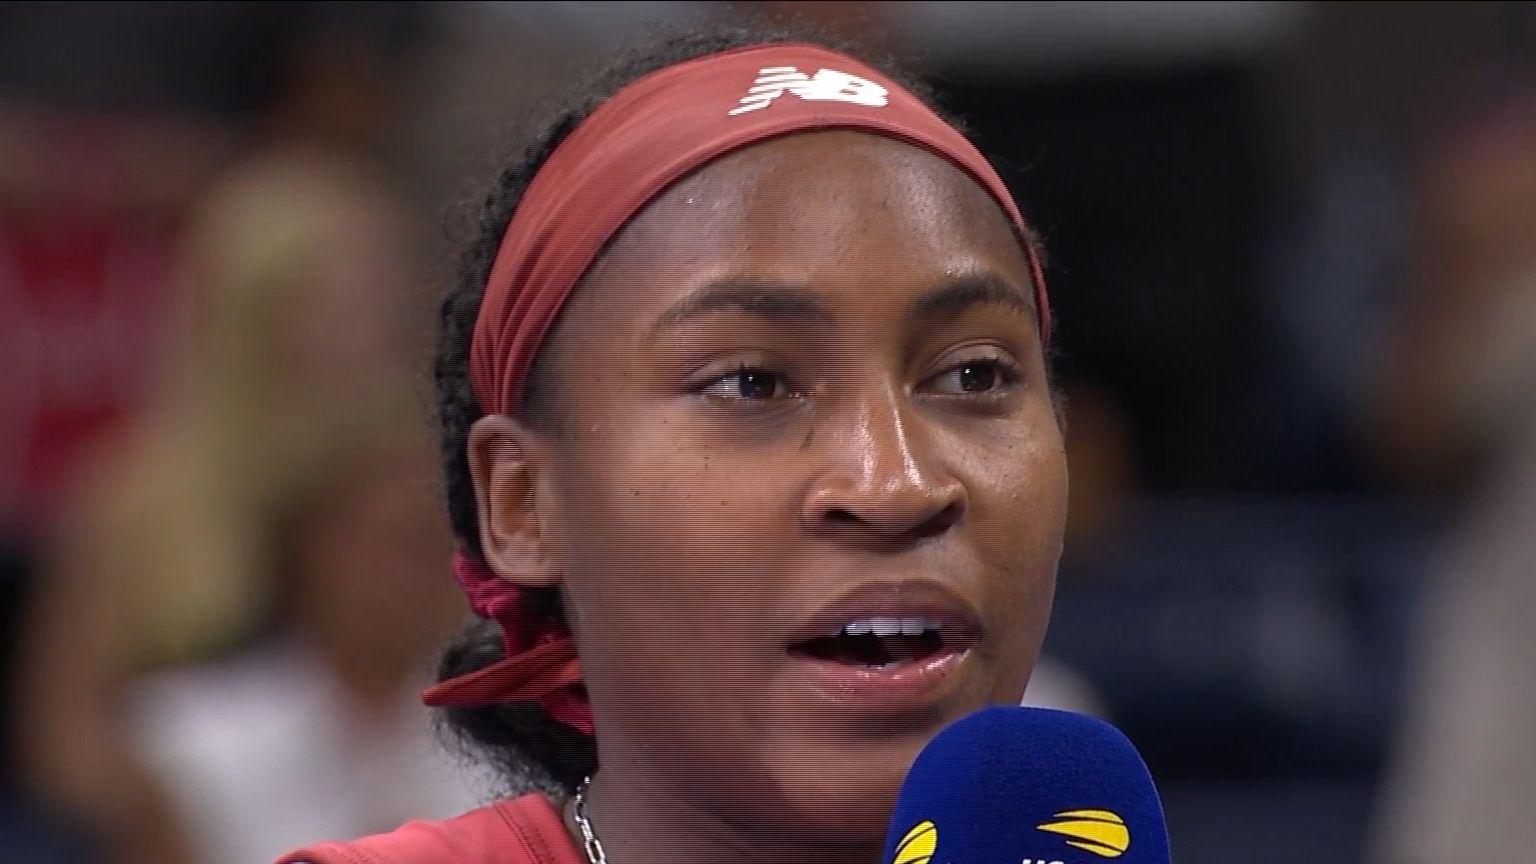 'Burning so bright': Coco Gauff's message to doubters after US Open victory